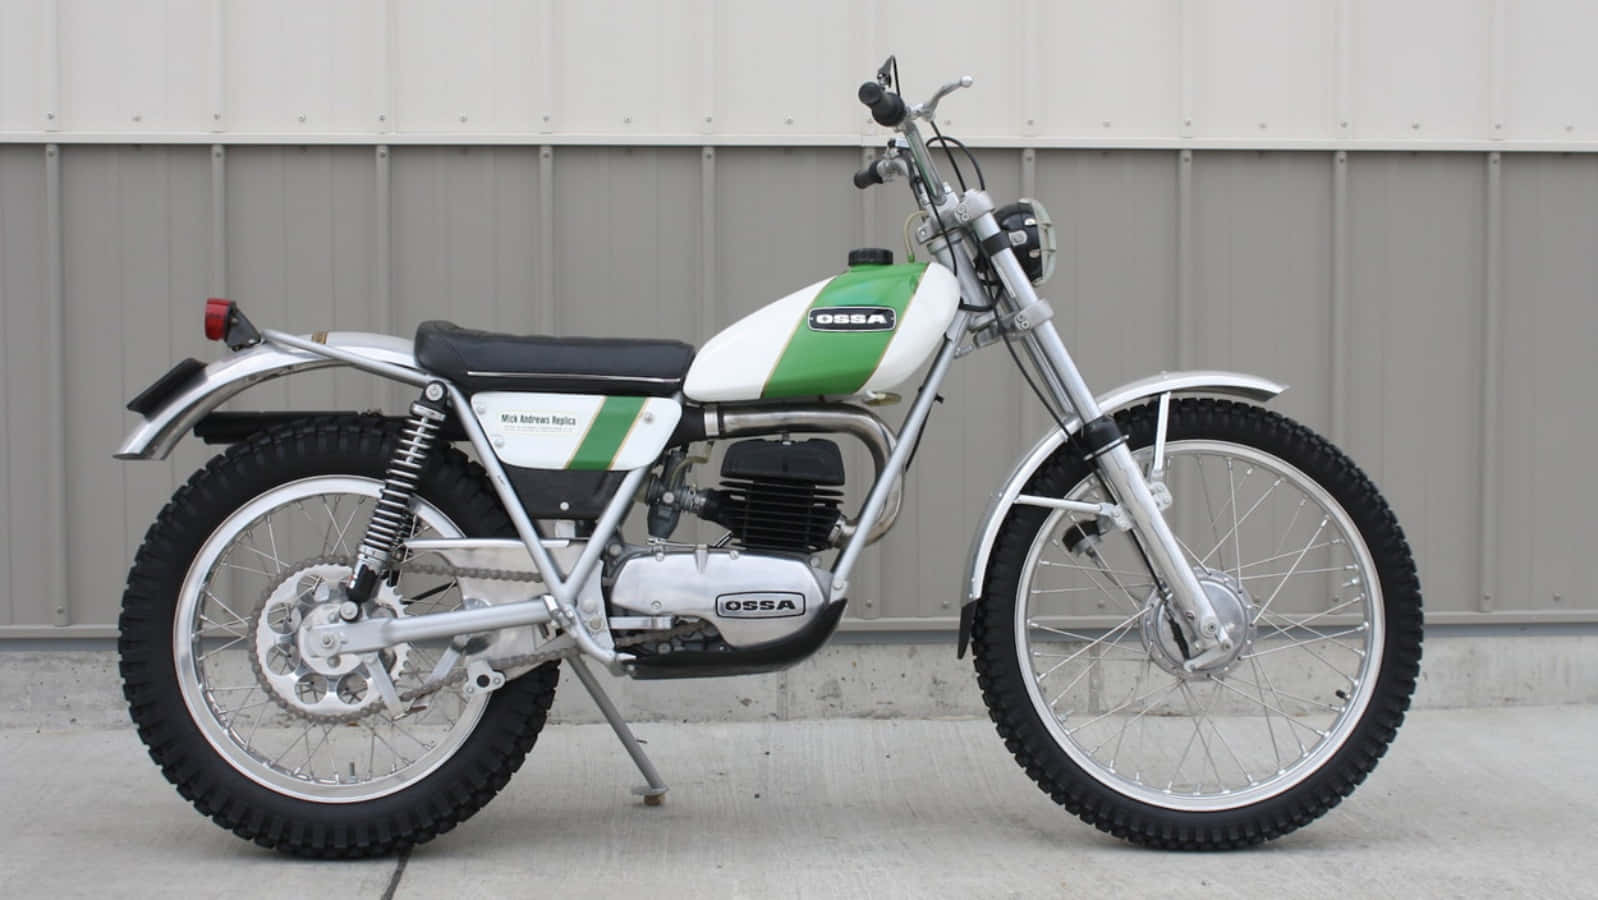 Classic Ossa Motorcycle In Pristine Condition Wallpaper